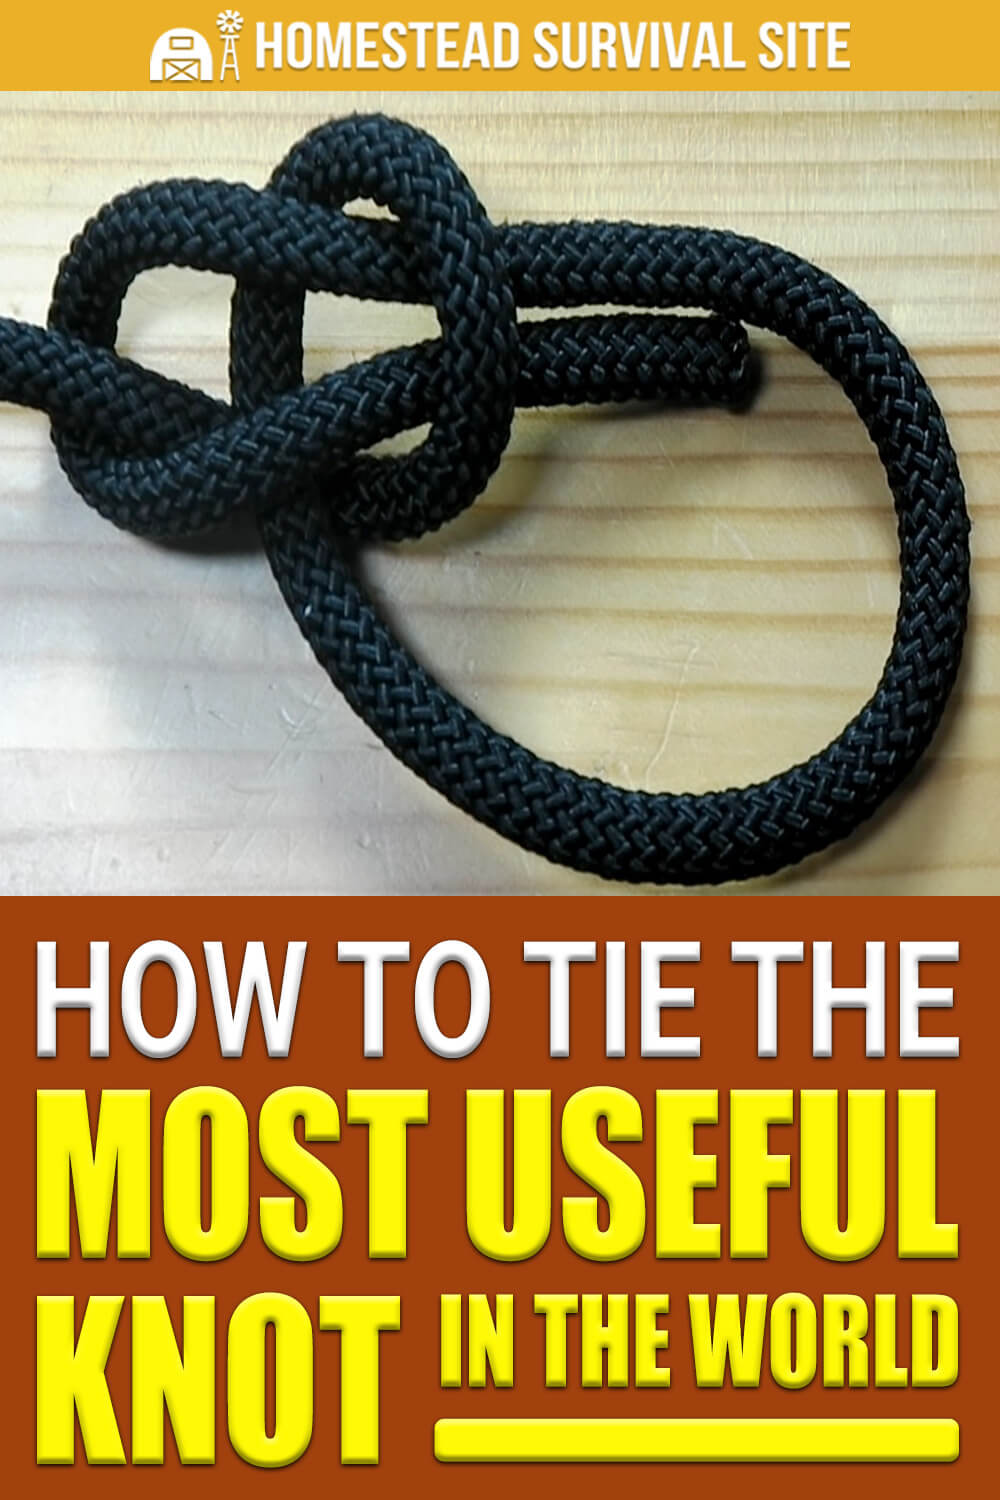 How to Tie the Most Useful Knot in the World